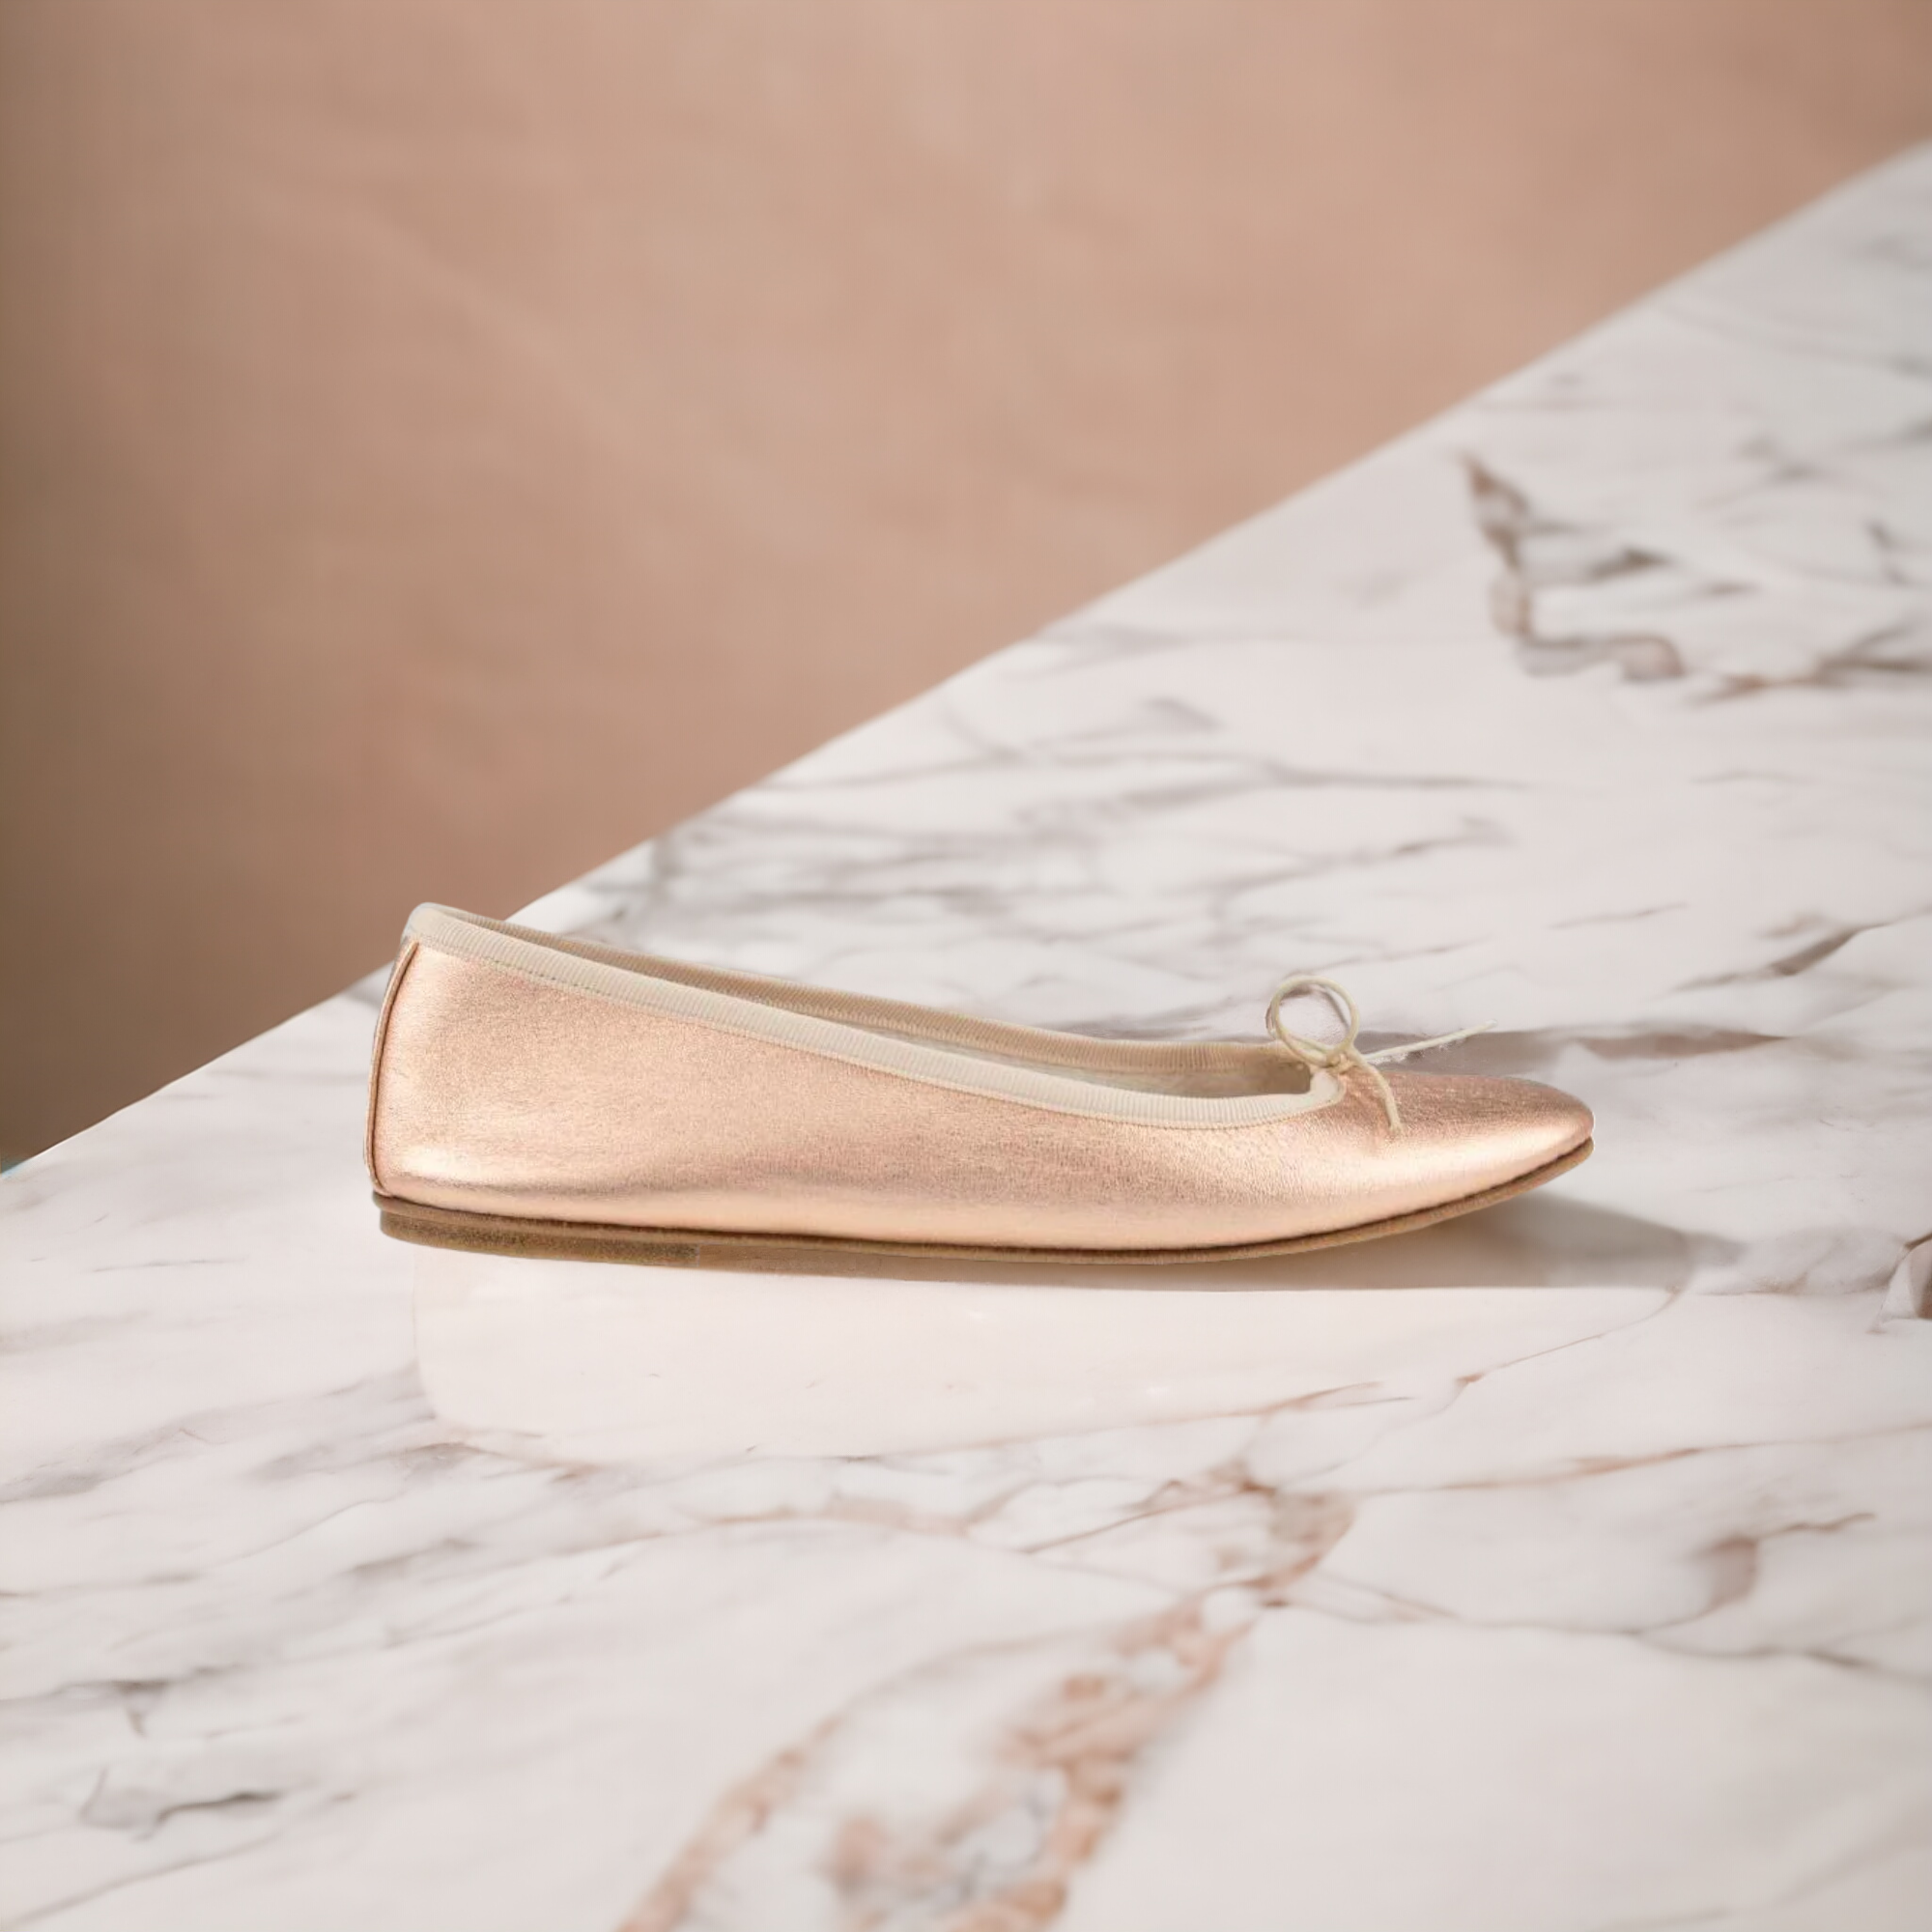 classical ballet dancer Nicole in rose gold